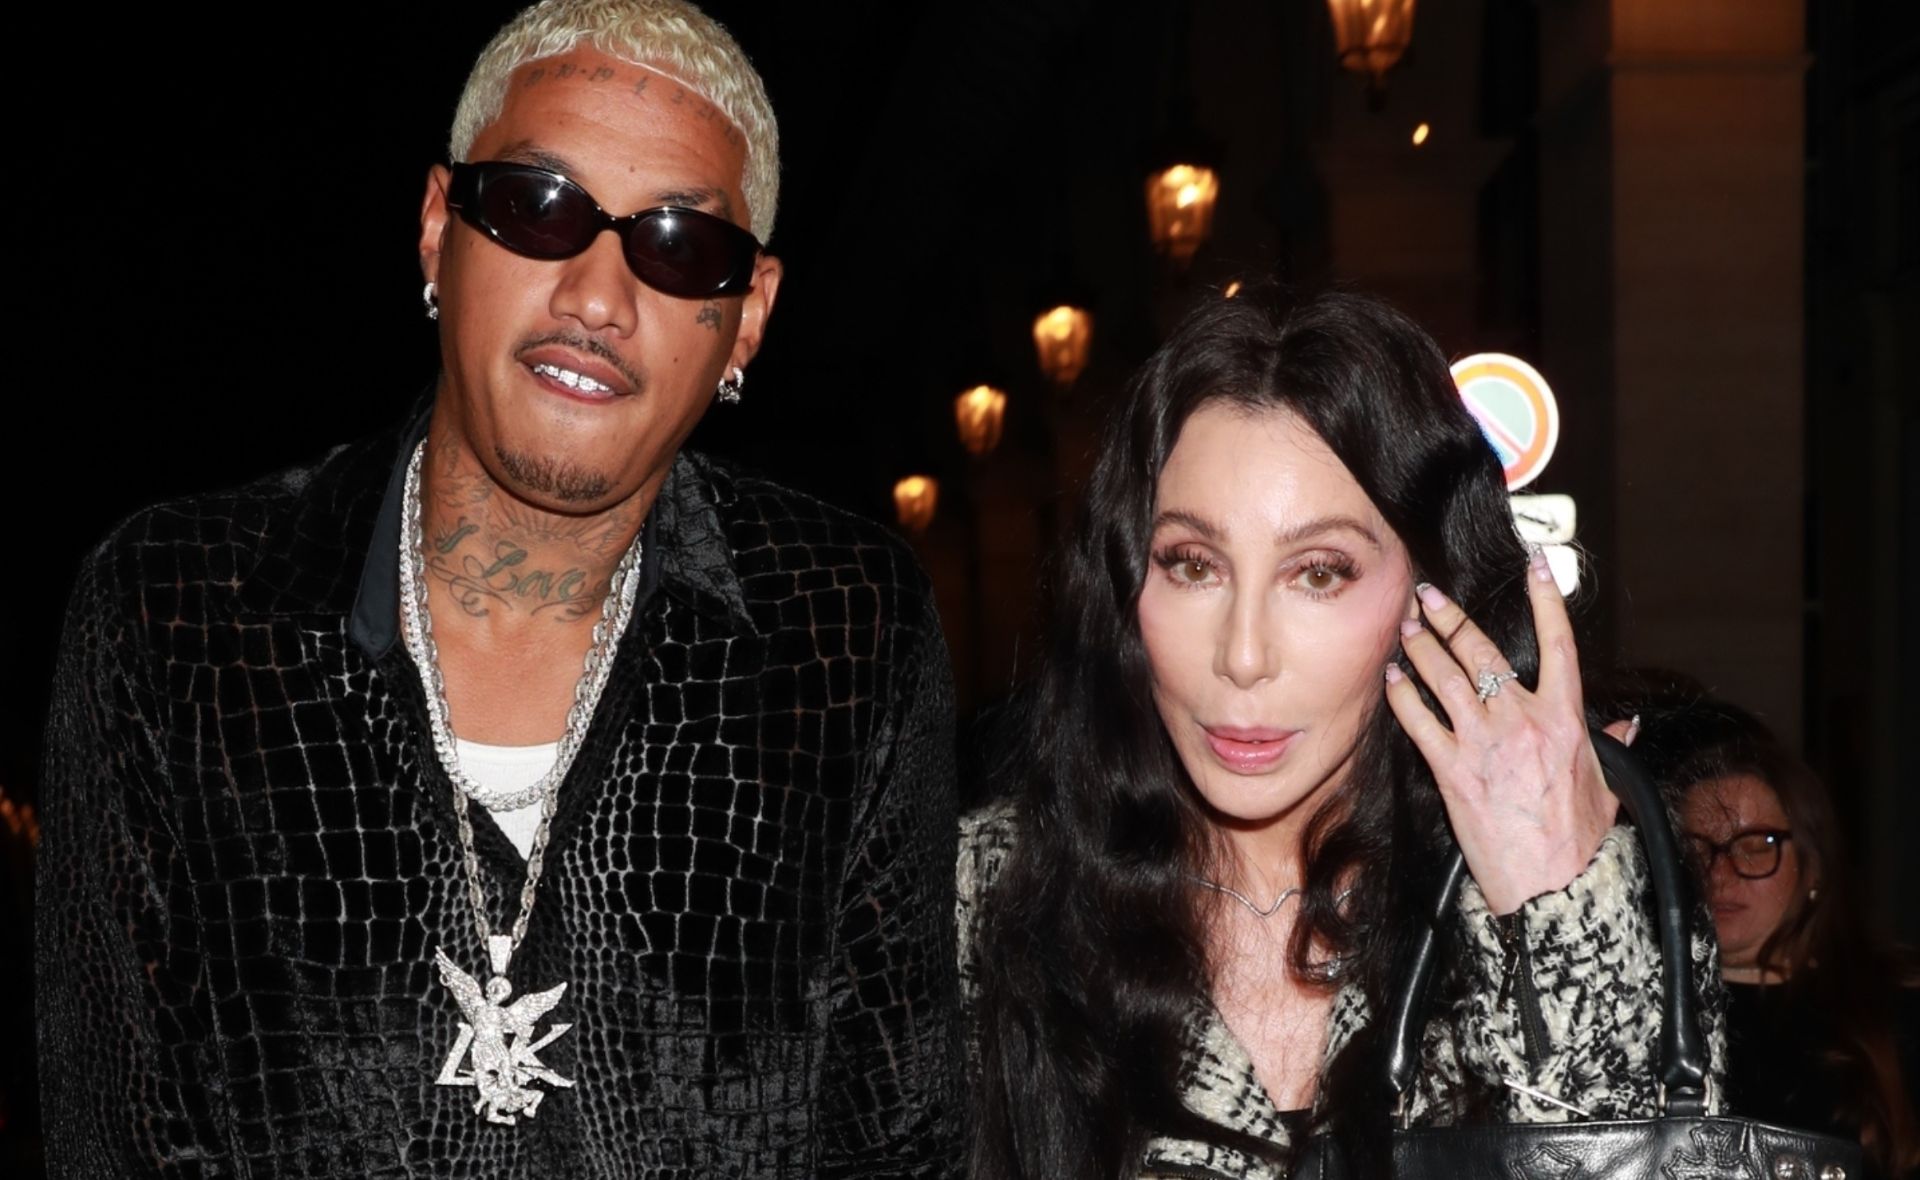 Cher’s son Elijah Blue Allman was kidnapped for an intervention